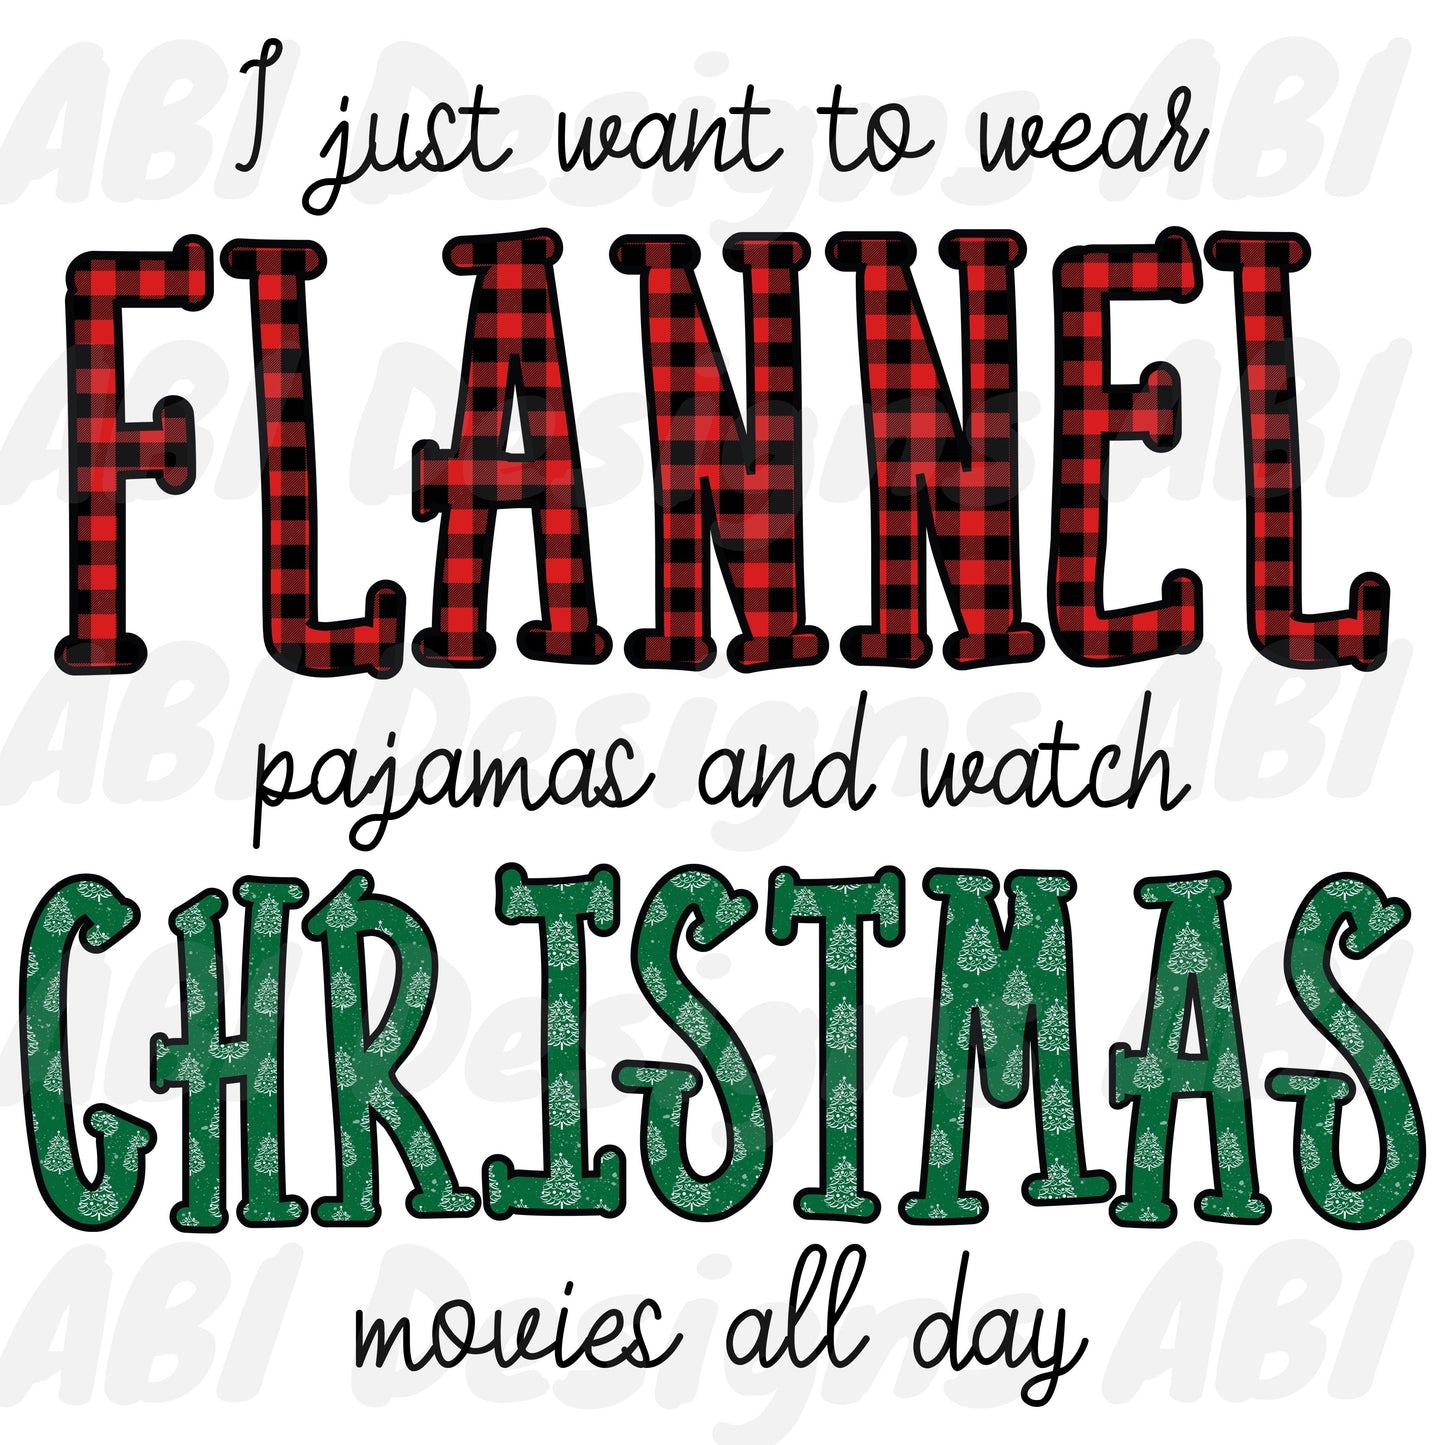 Wear flannels and watch christmas - Sublimation